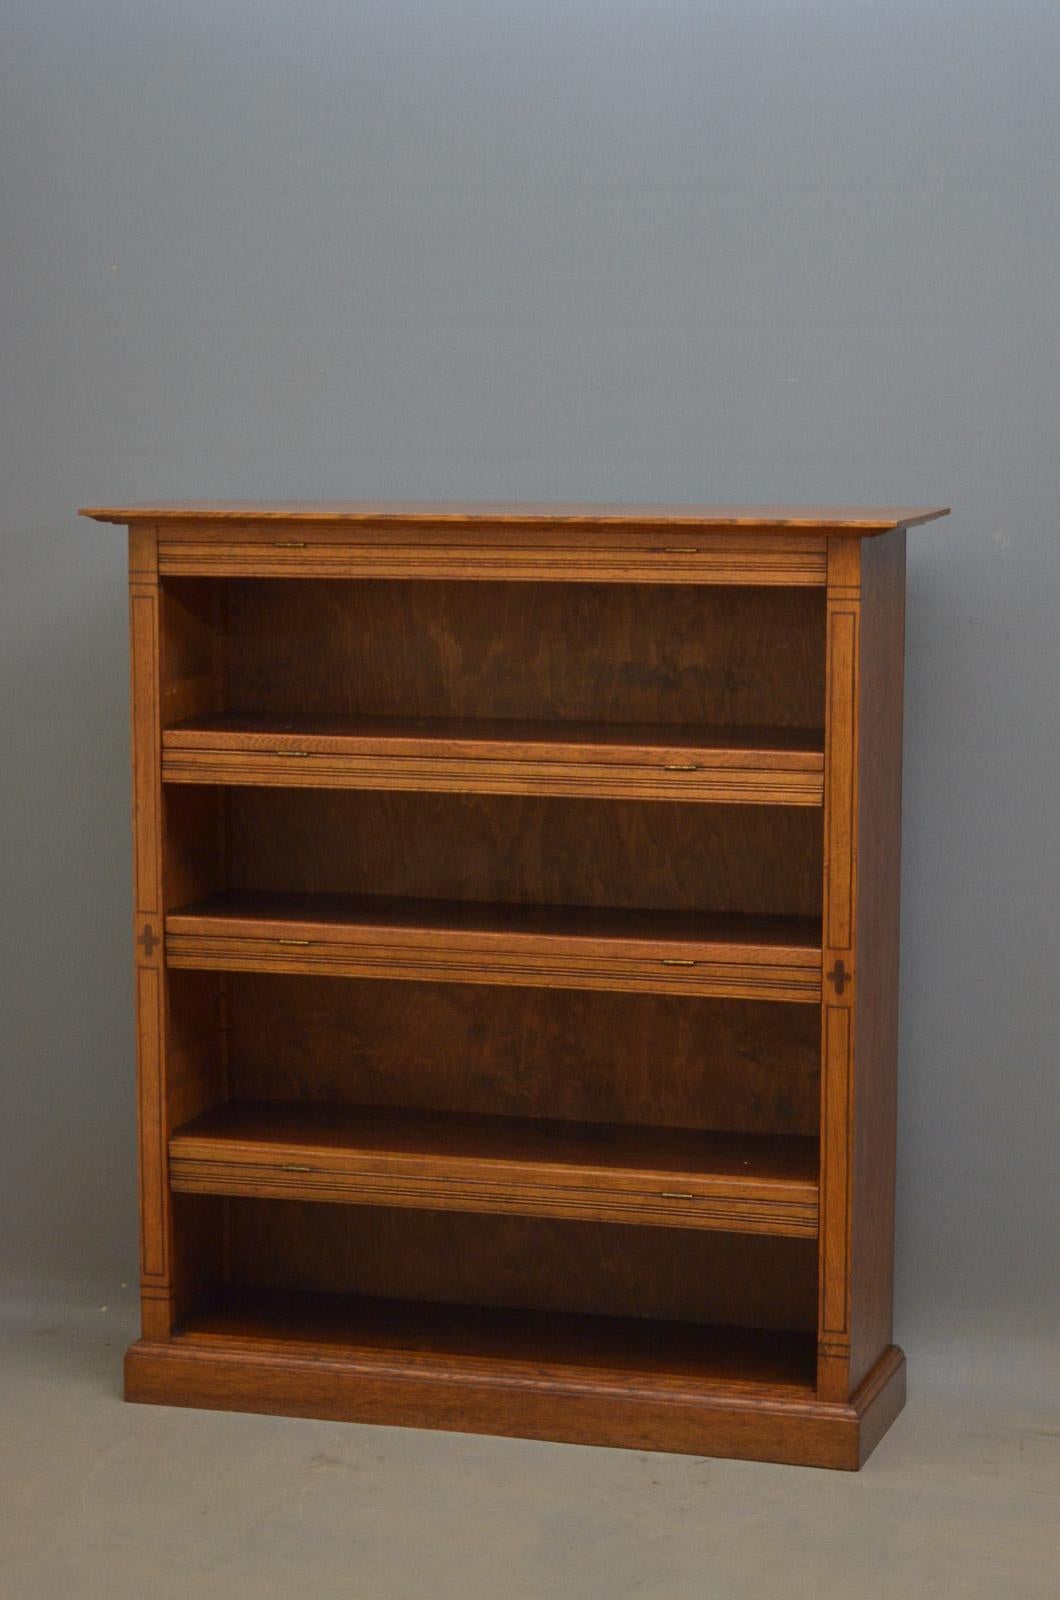 R00 Arts & Crafts oak bookcase, having over-sailing top above 3 height adjustable shelves fitted with hinged dust covers and flanked by string inlaid pilasters, standing on moulded plinth base. This antique bookcase is in excellent original